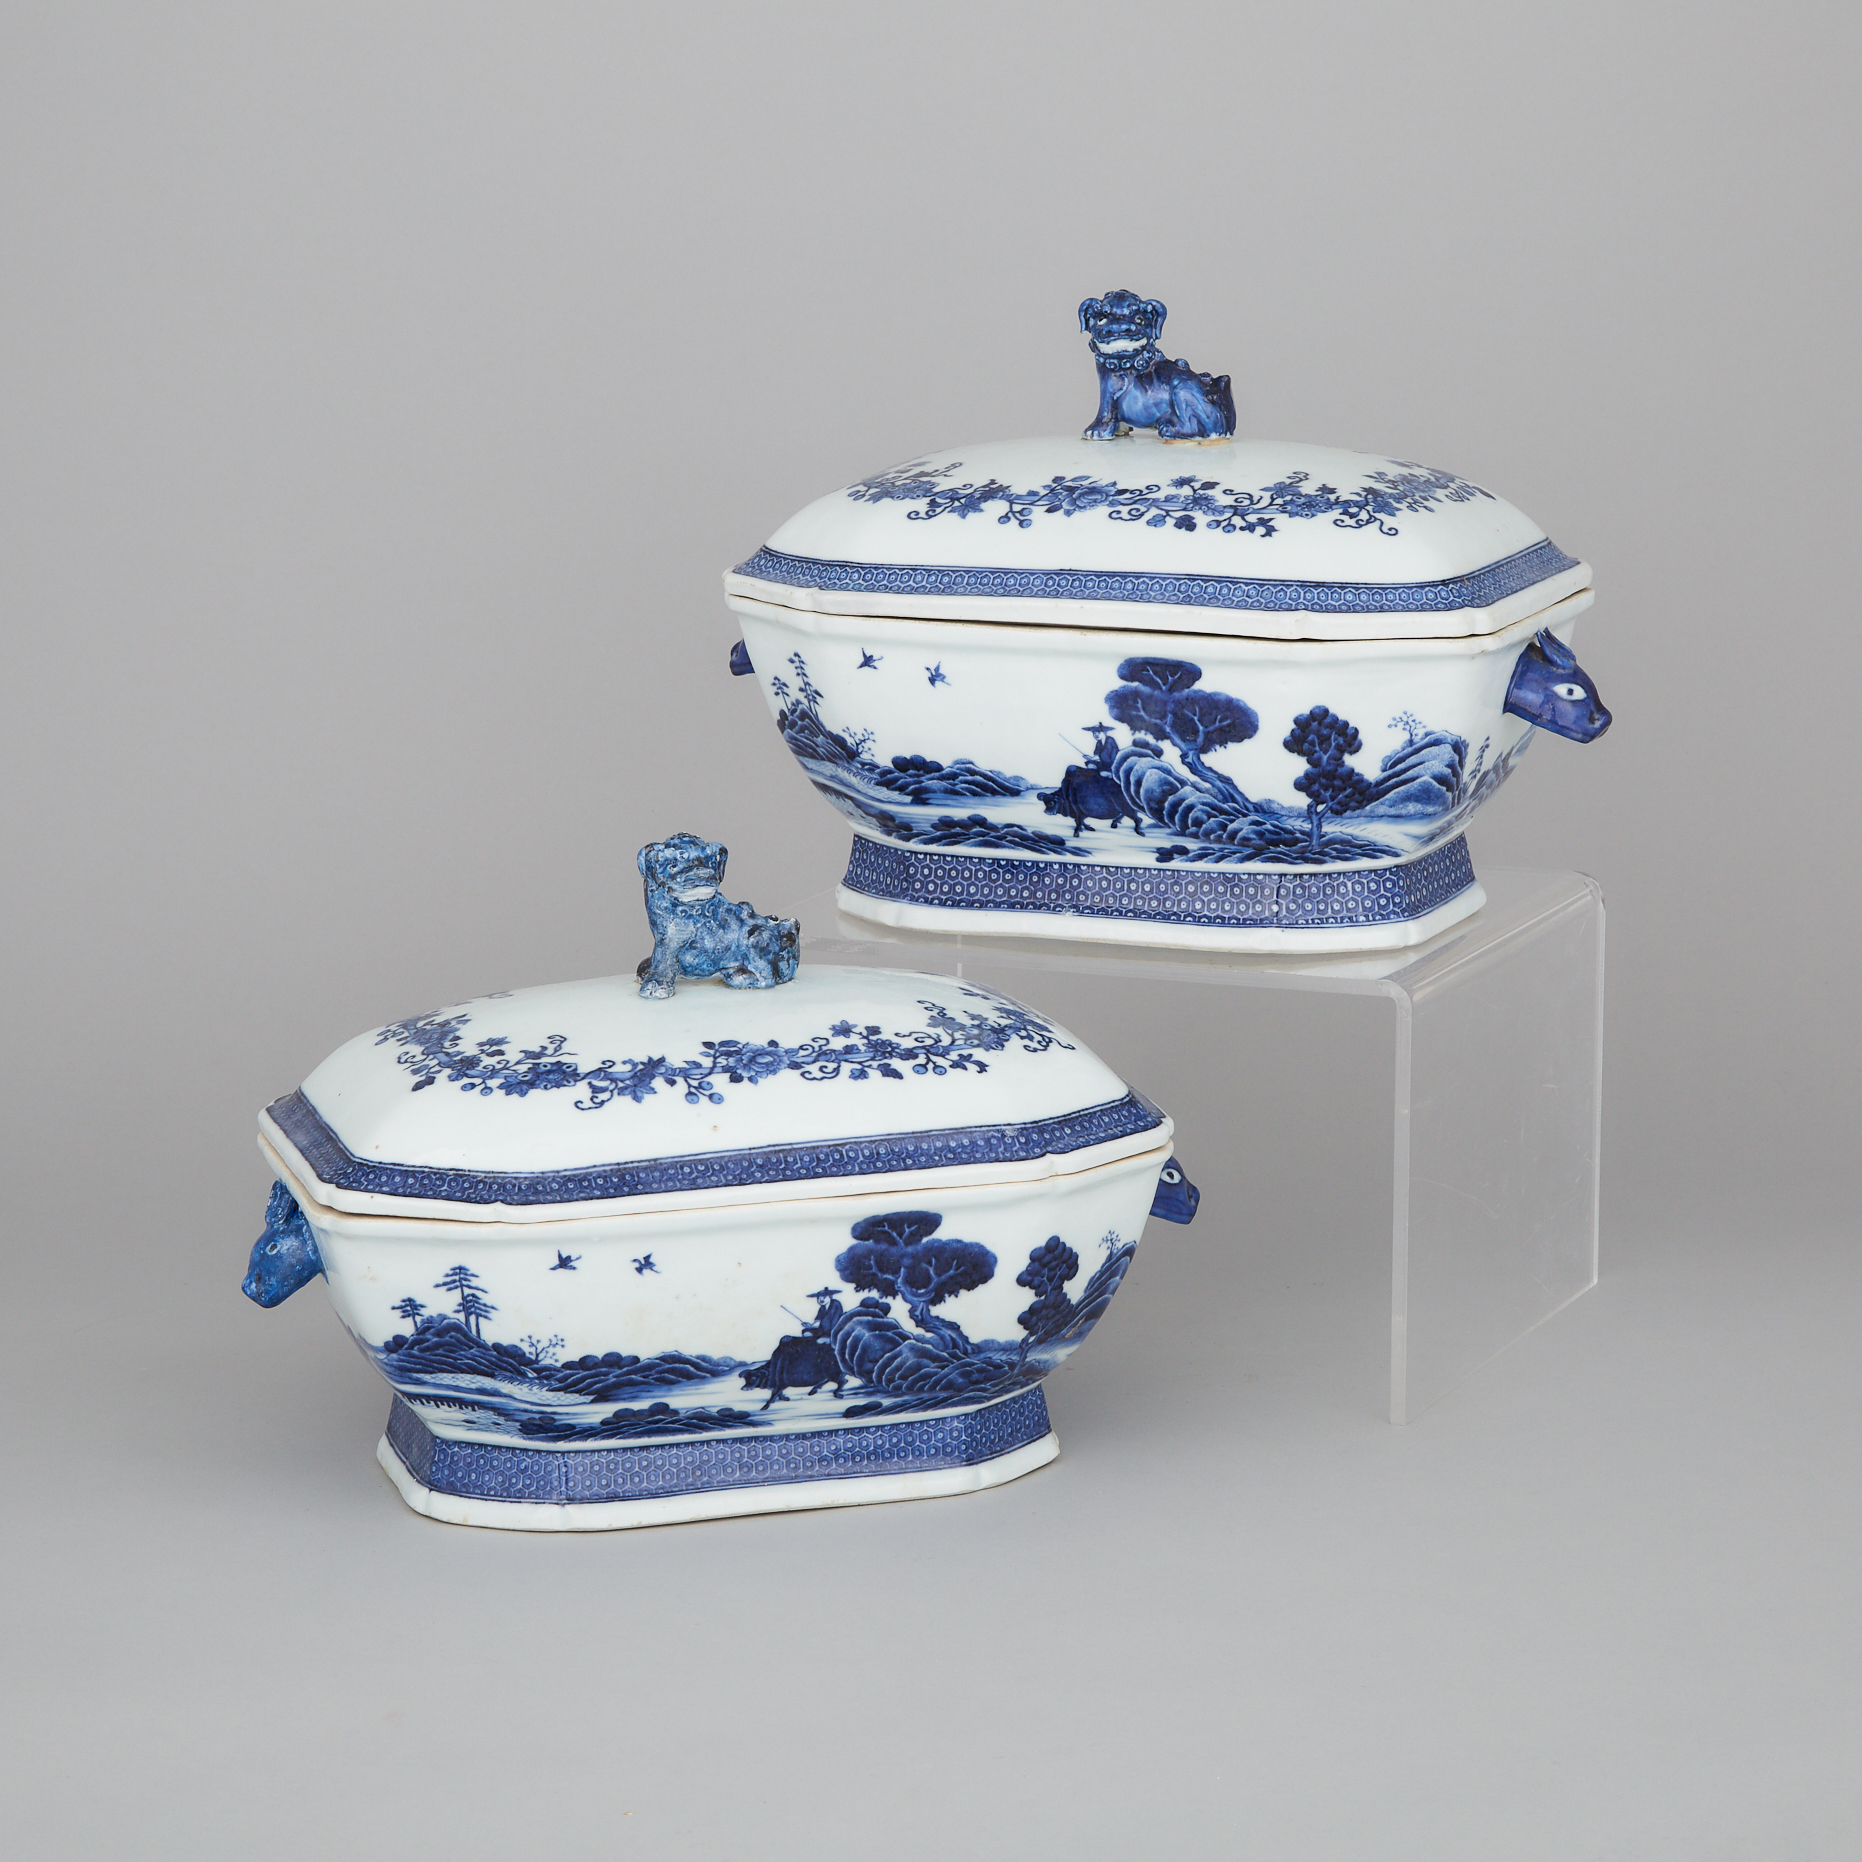 A Pair of of Blue and White Export Tureens, 19th Century